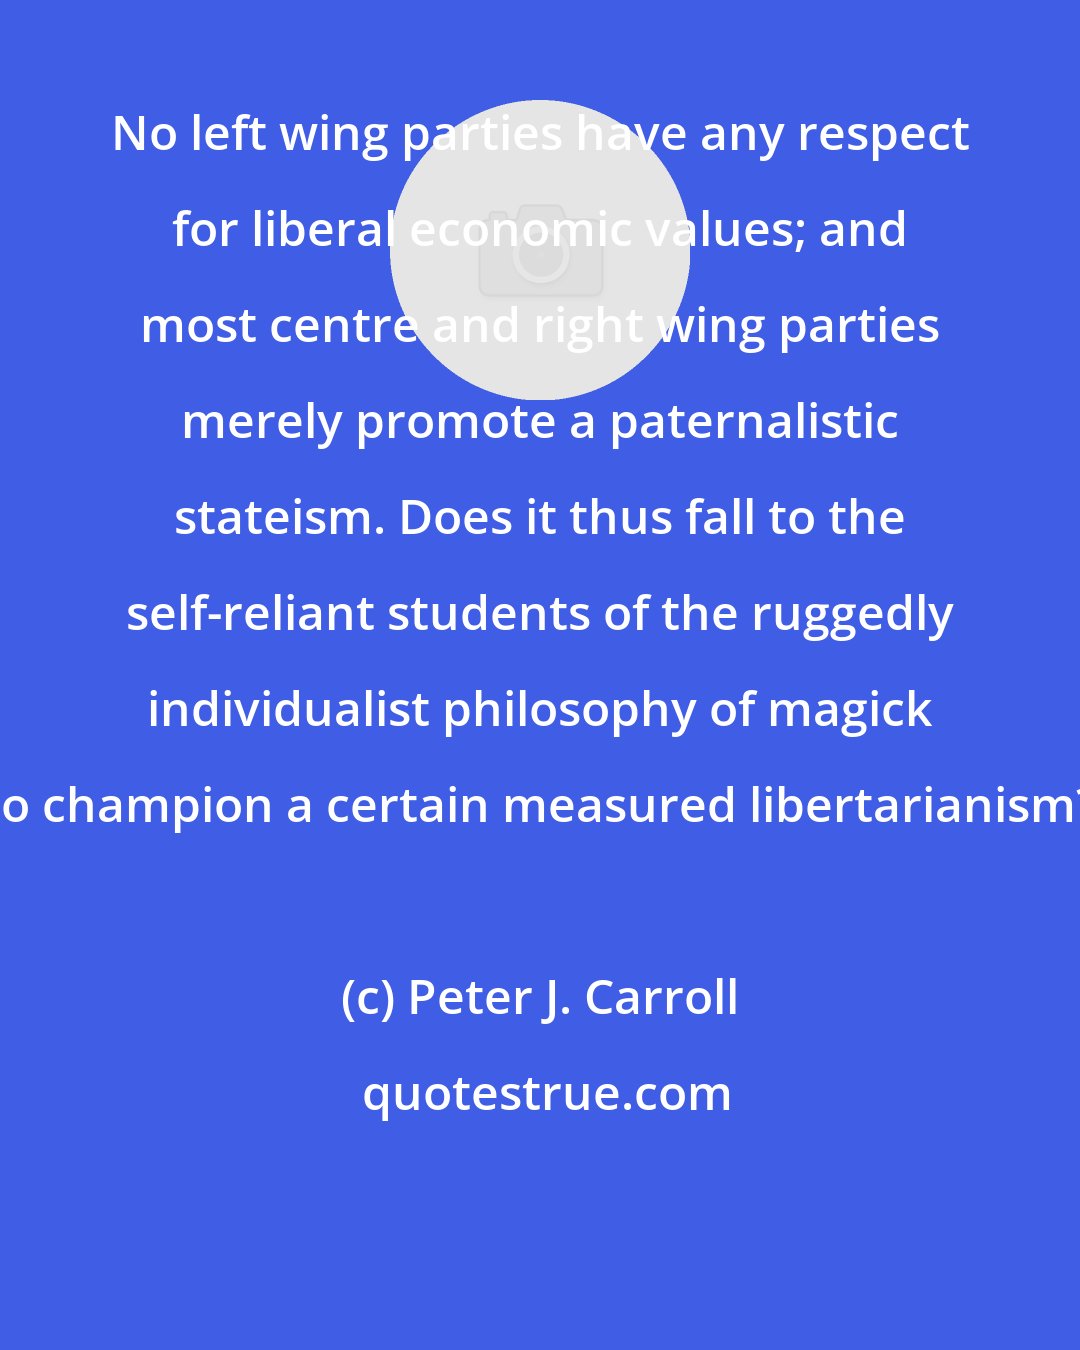 Peter J. Carroll: No left wing parties have any respect for liberal economic values; and most centre and right wing parties merely promote a paternalistic stateism. Does it thus fall to the self-reliant students of the ruggedly individualist philosophy of magick to champion a certain measured libertarianism?